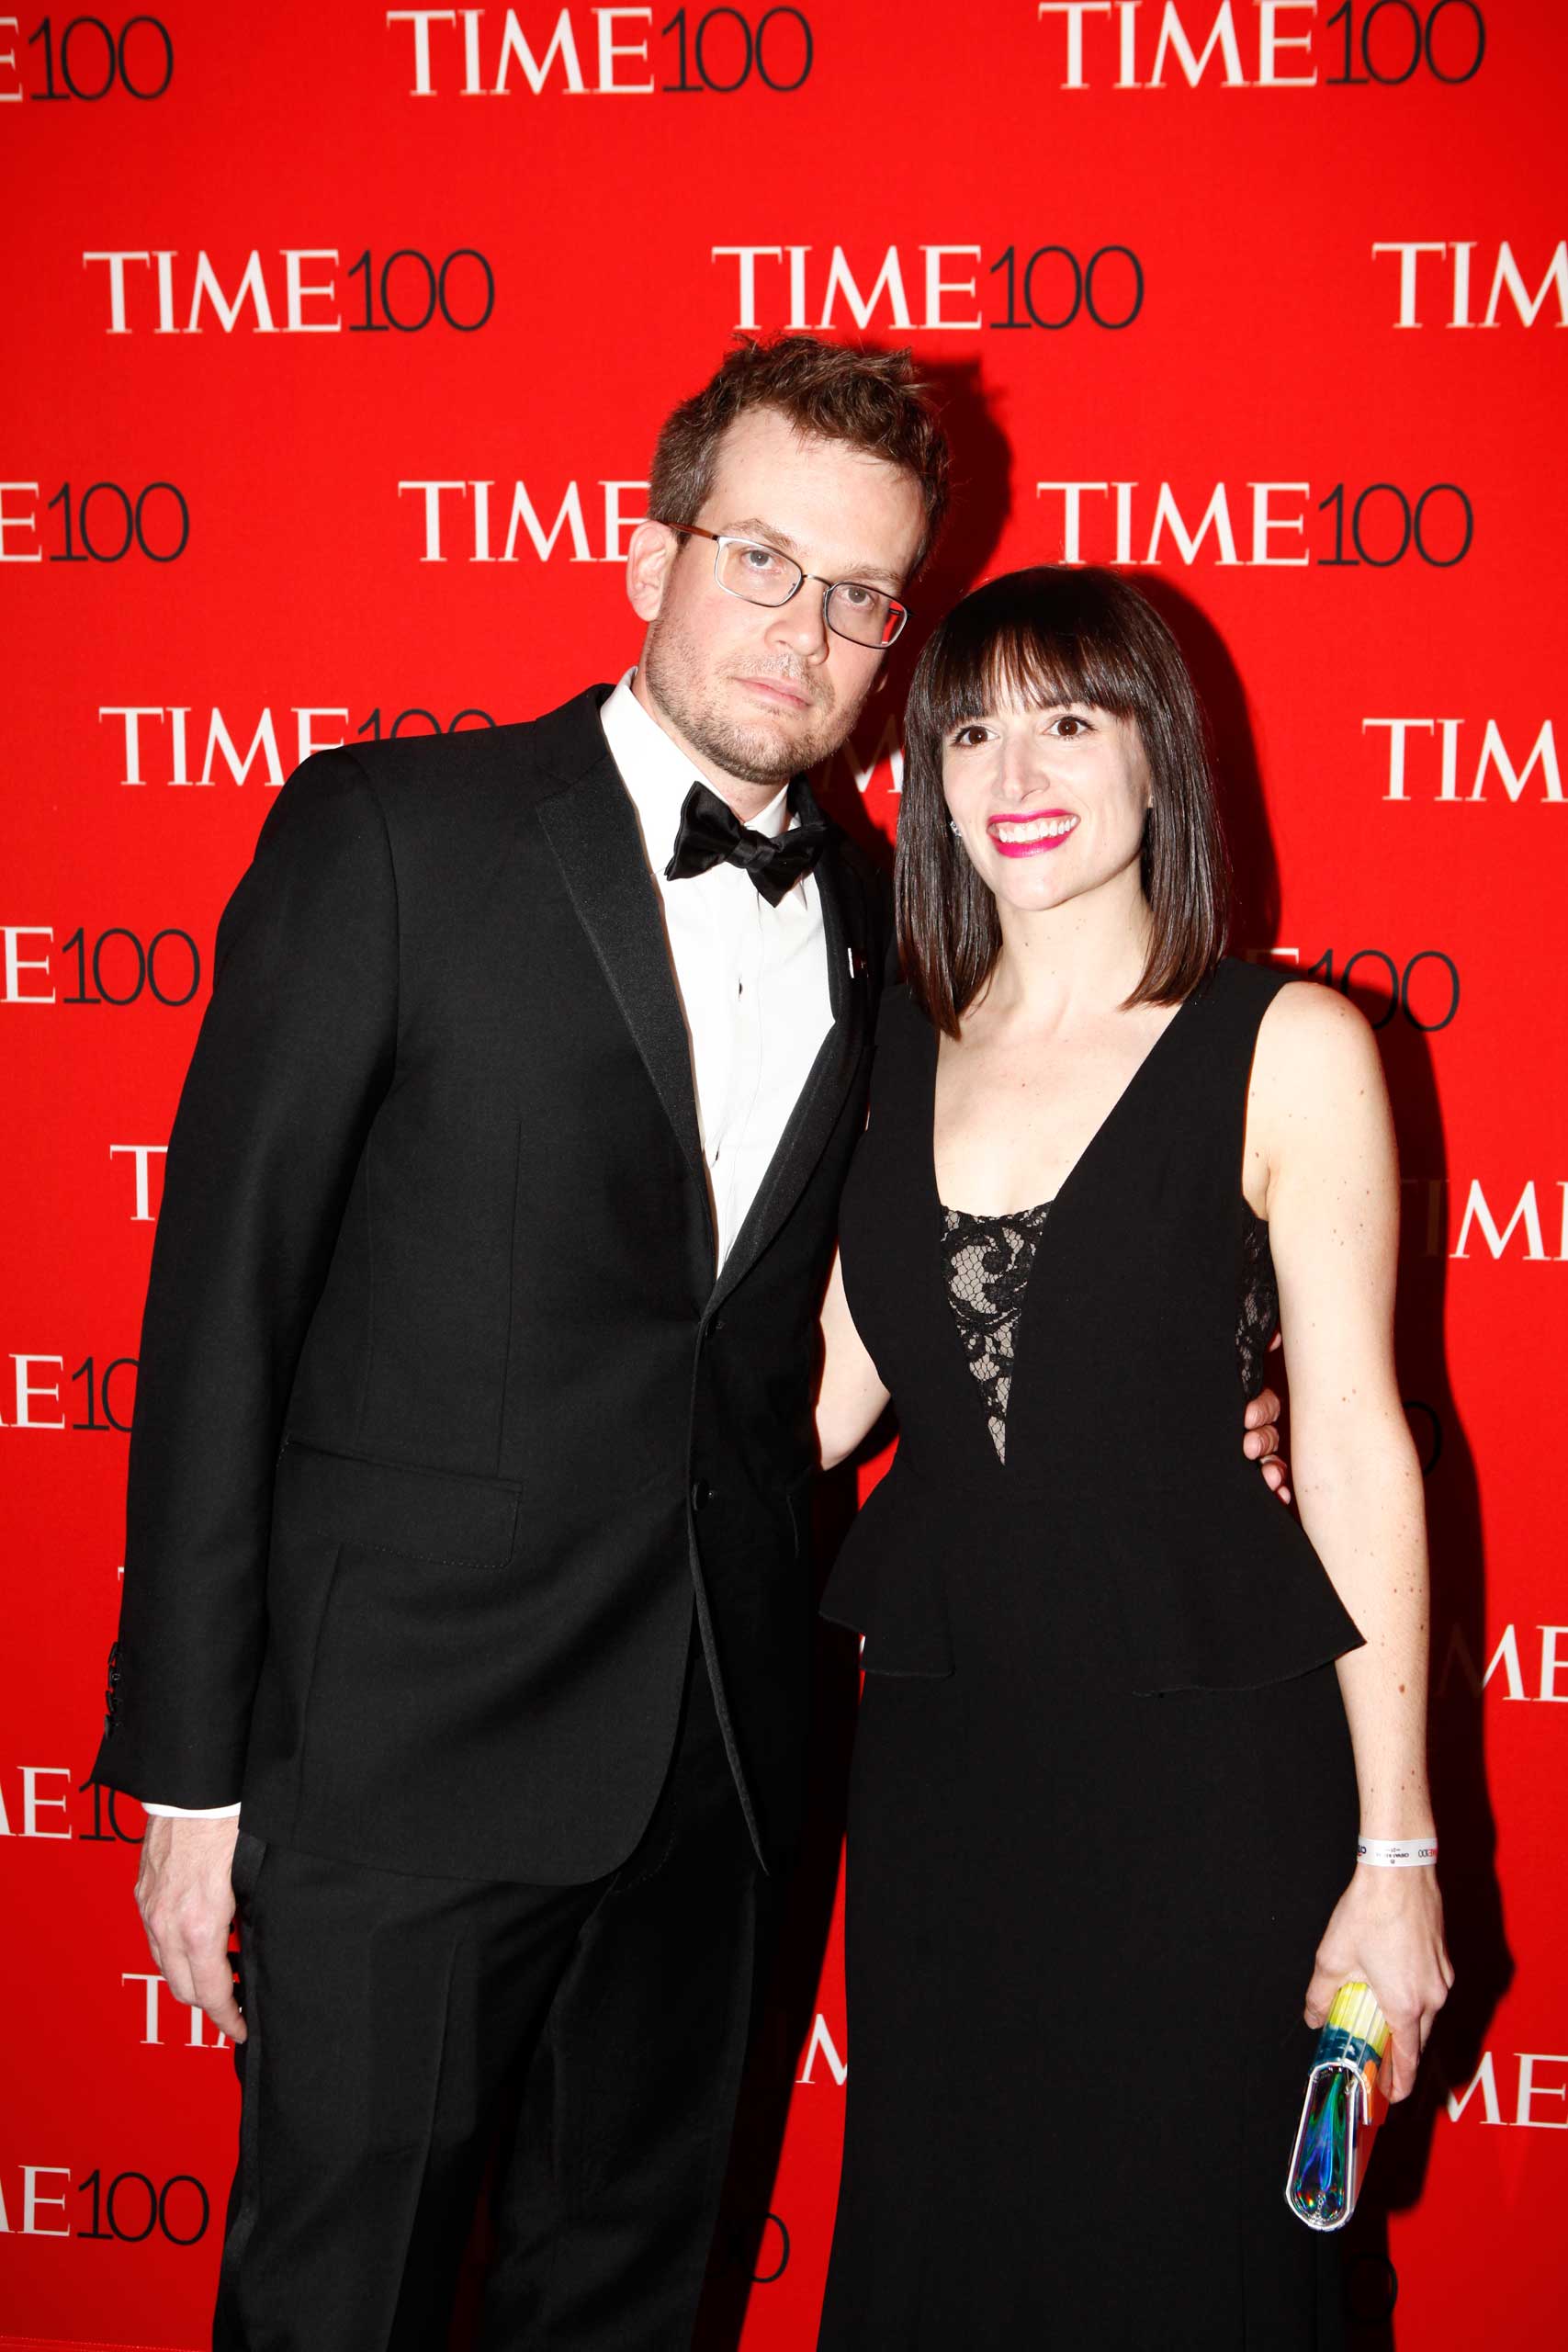 John Green attends the TIME 100 Gala at Lincoln Center in New York, NY on Apr. 21, 2015.